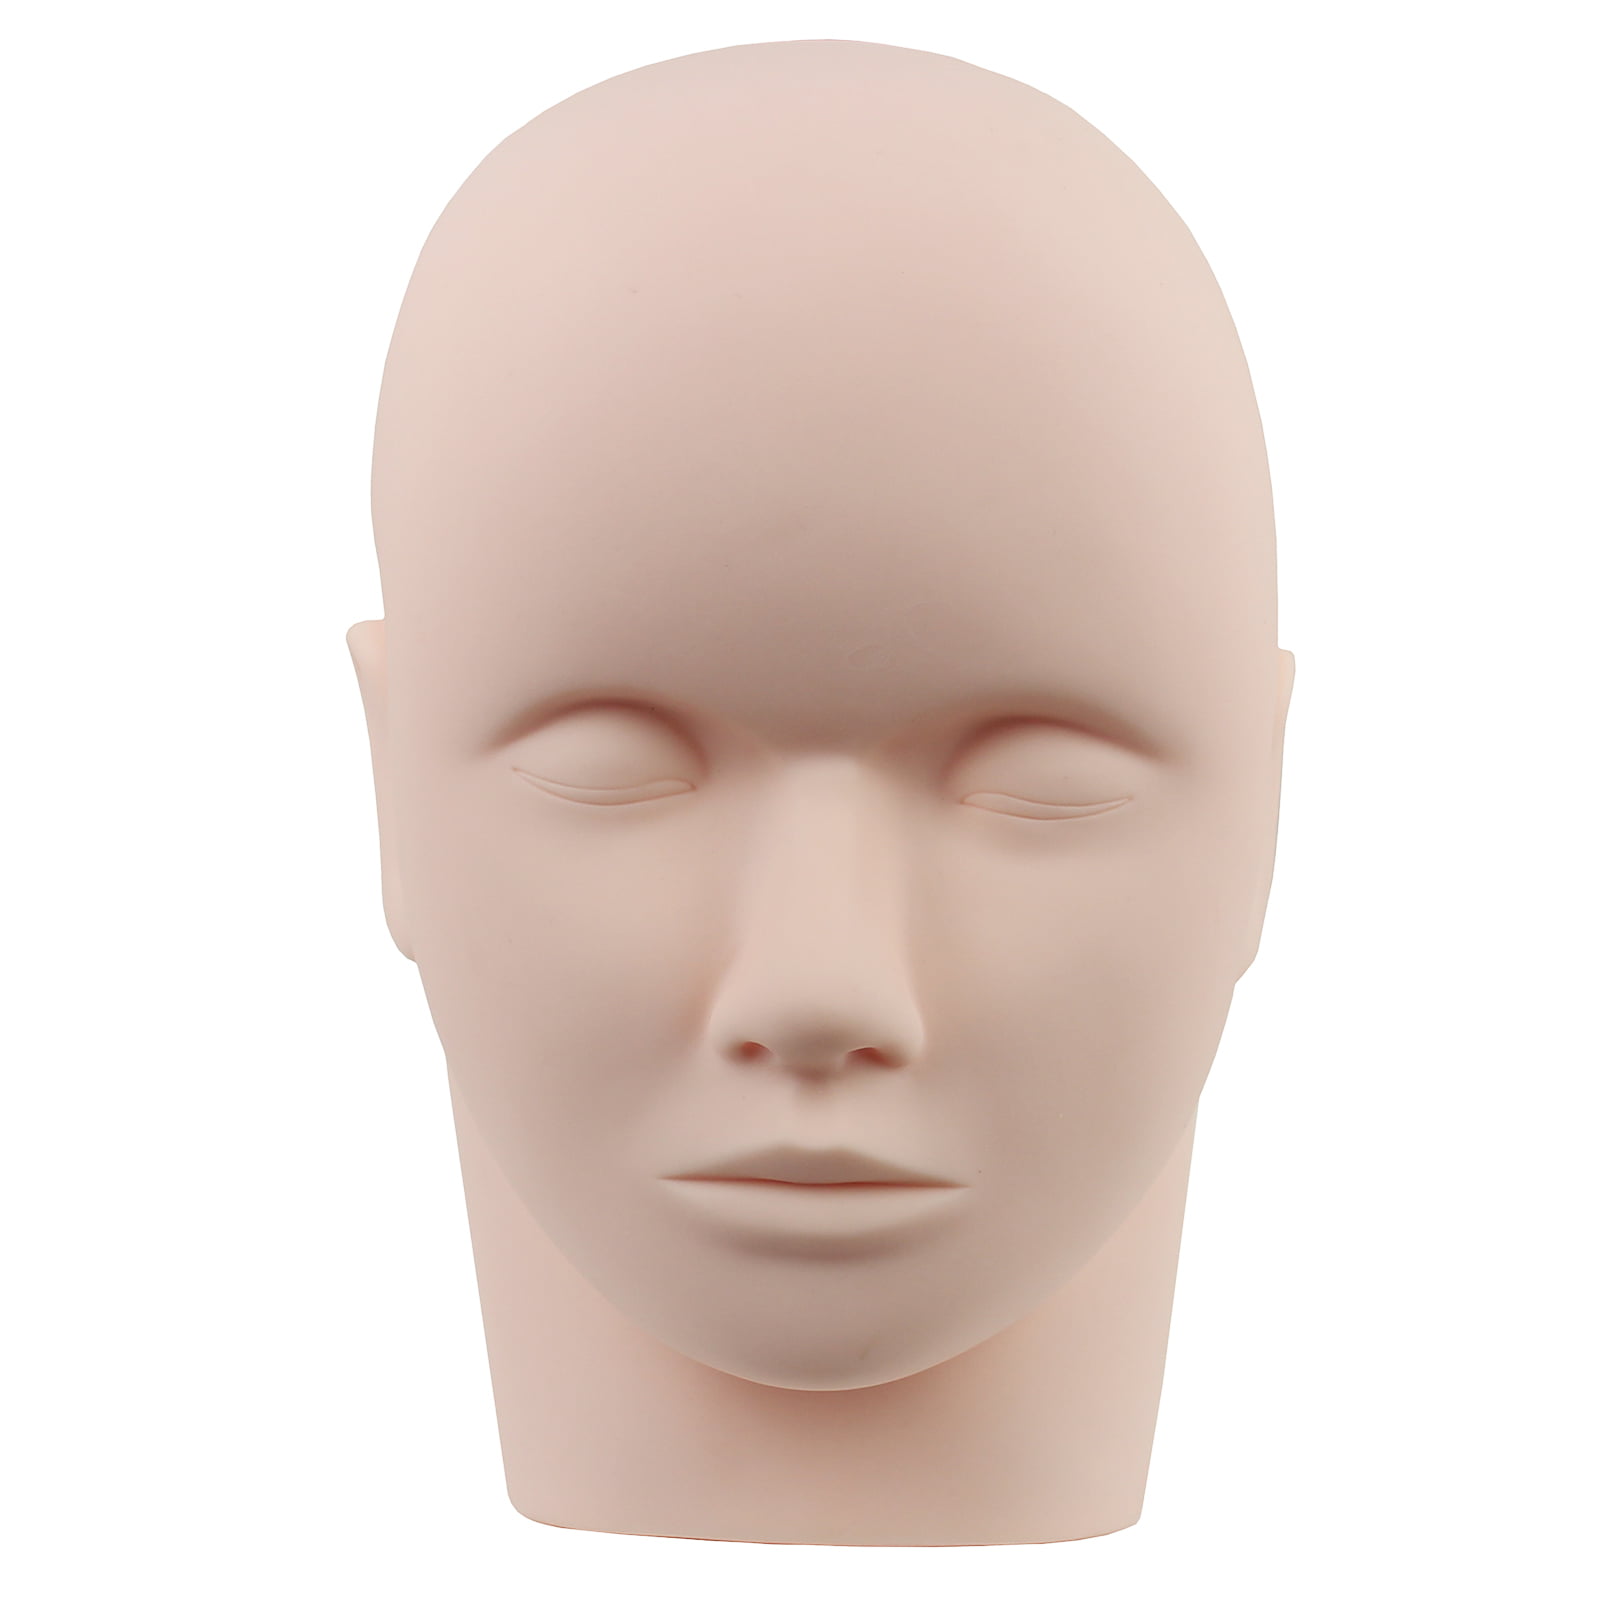 Rubber Practice Training Head Mannequin Doll Face Makeup Eyelashes